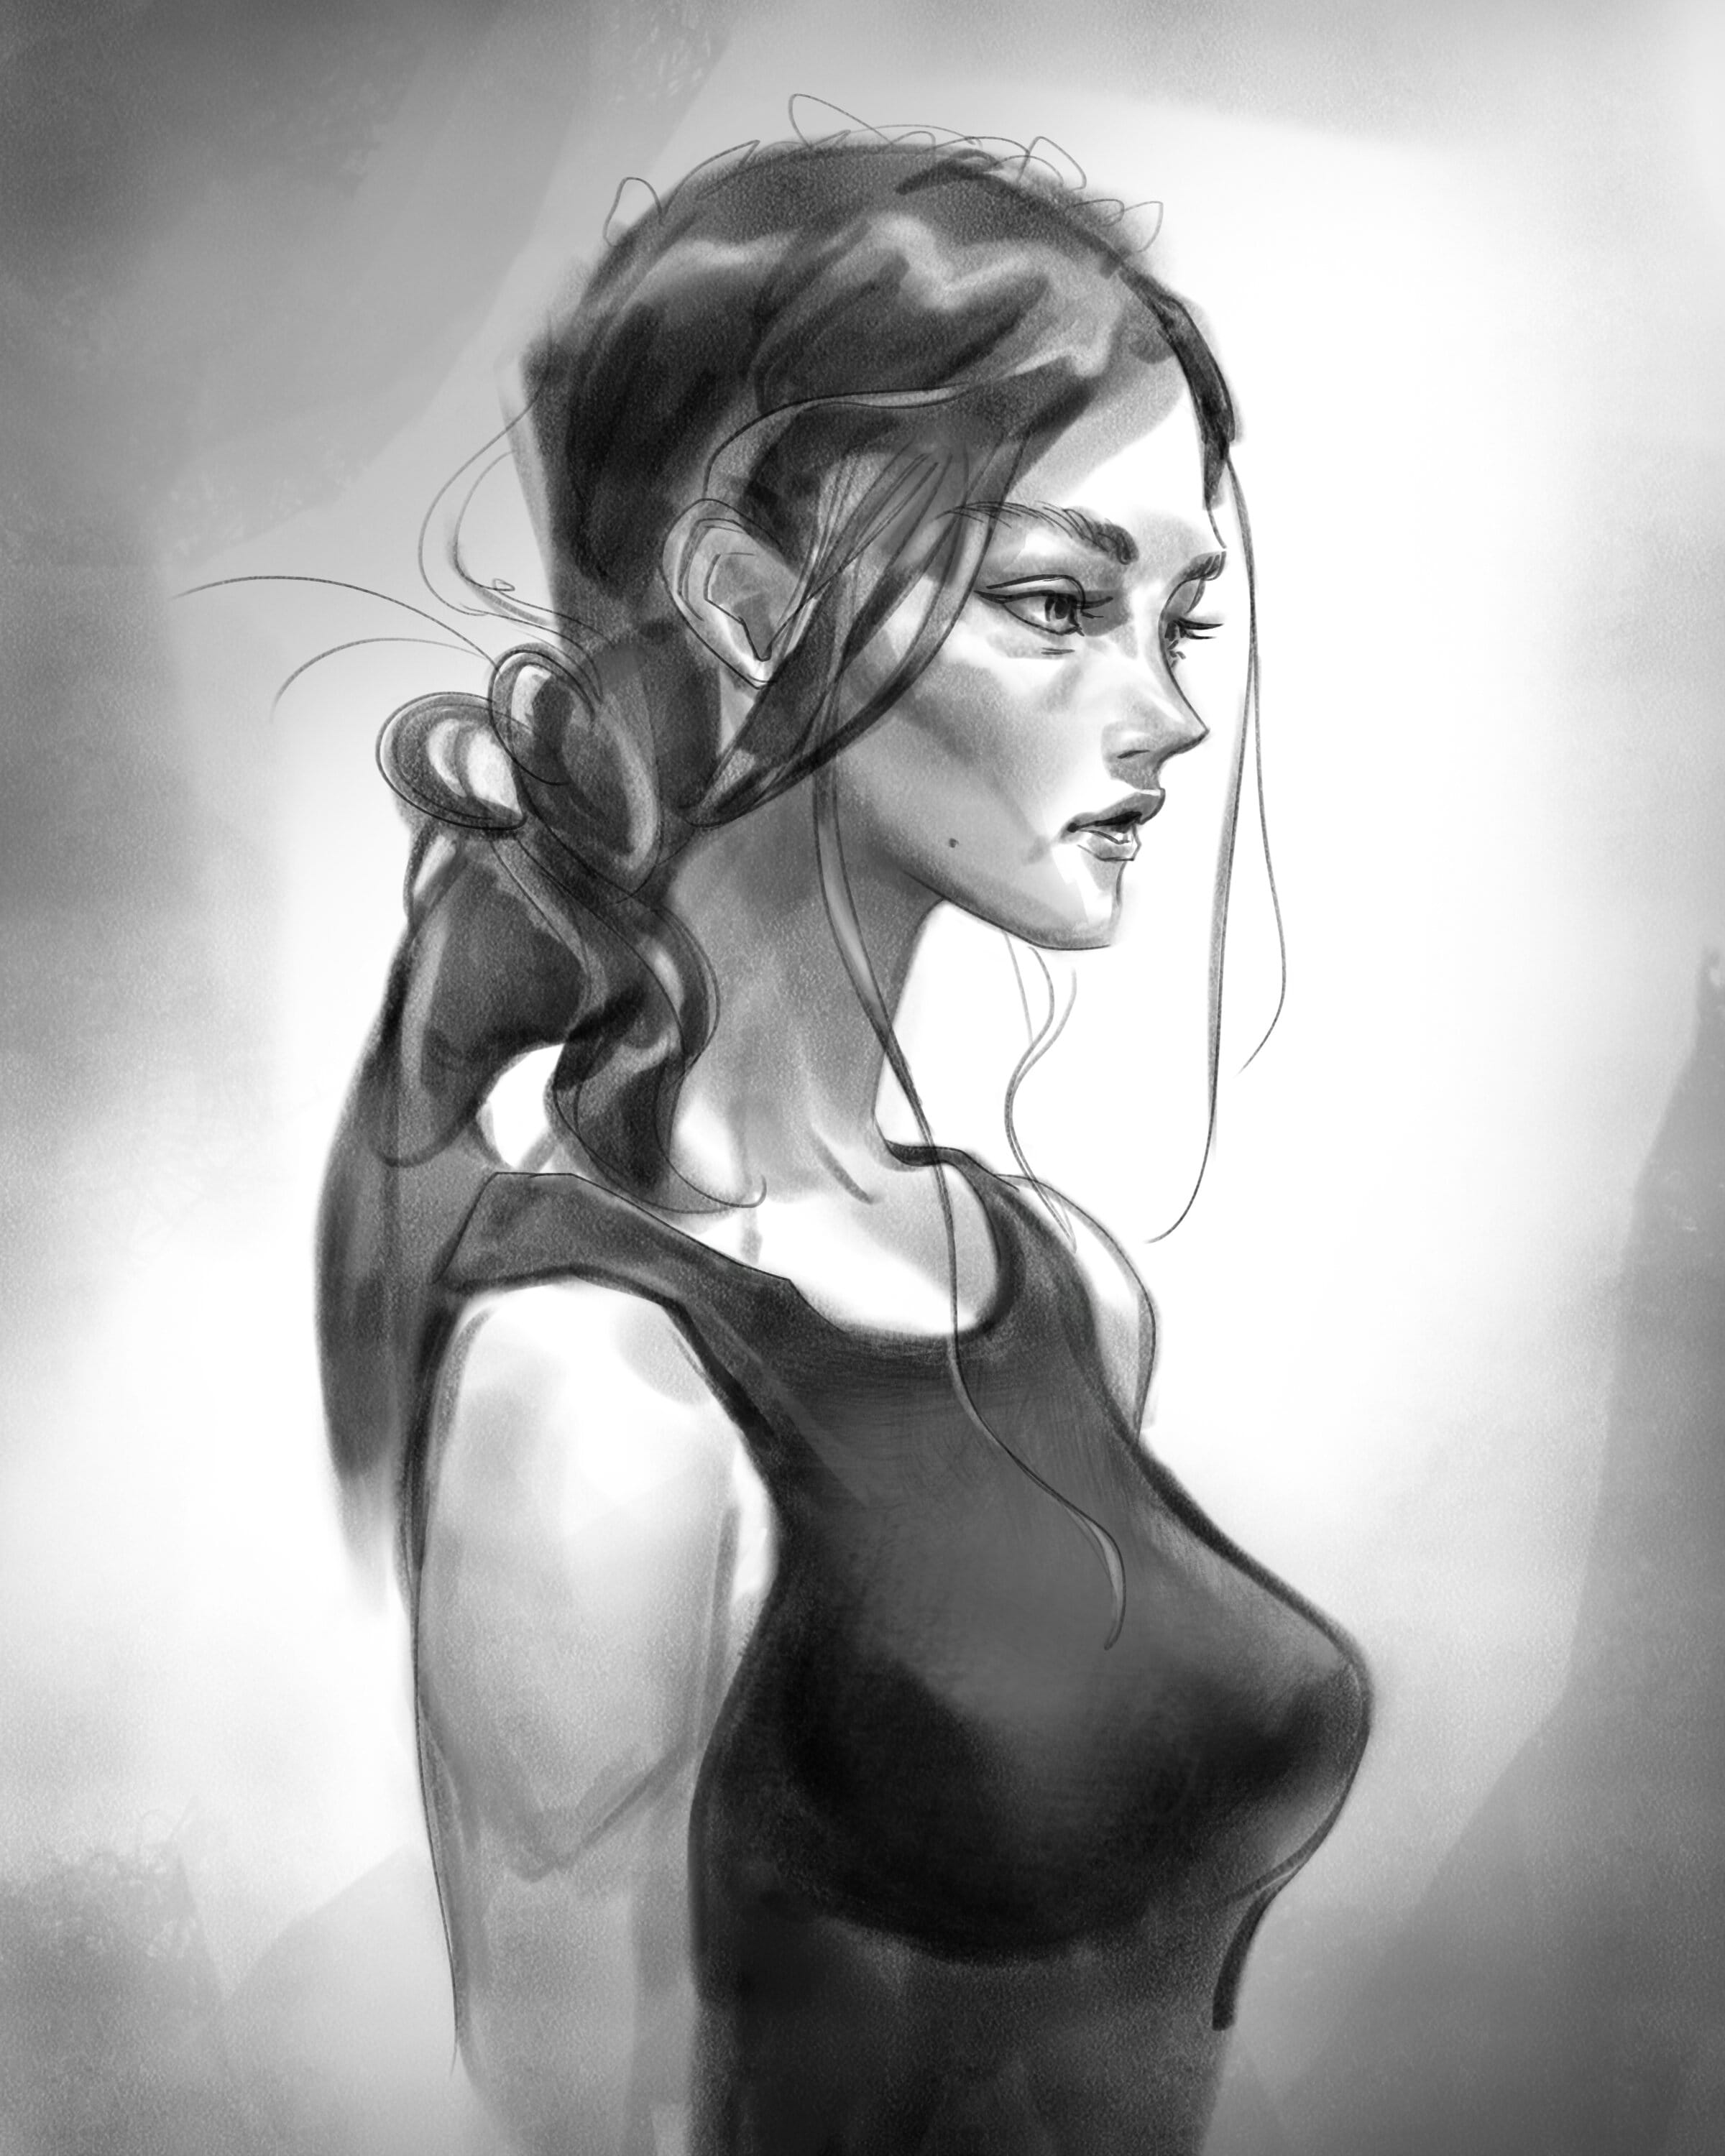 black and white sketch of a woman in a tanktop with long hair